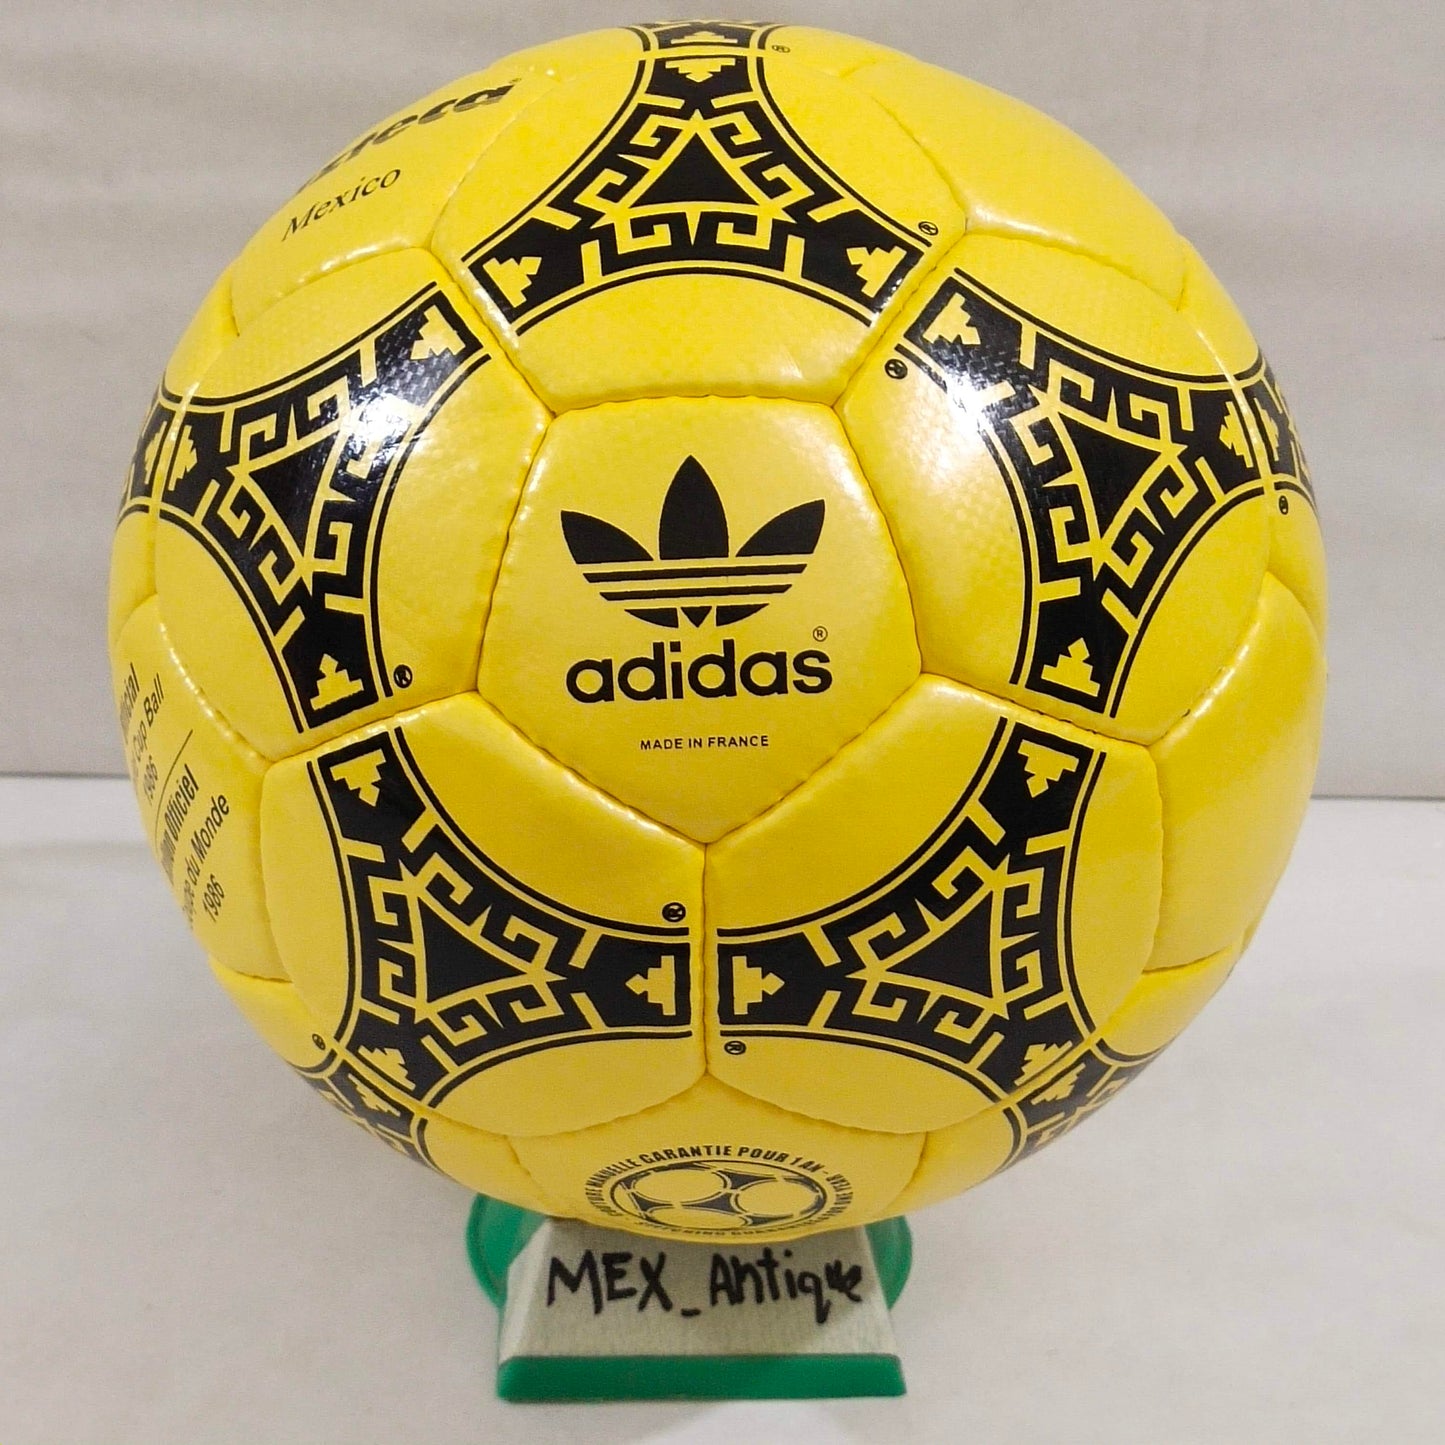 Adidas Azteca Mexico | FIFA World Cup 1986 | Yellow Winter Ball l SIZE 5 04